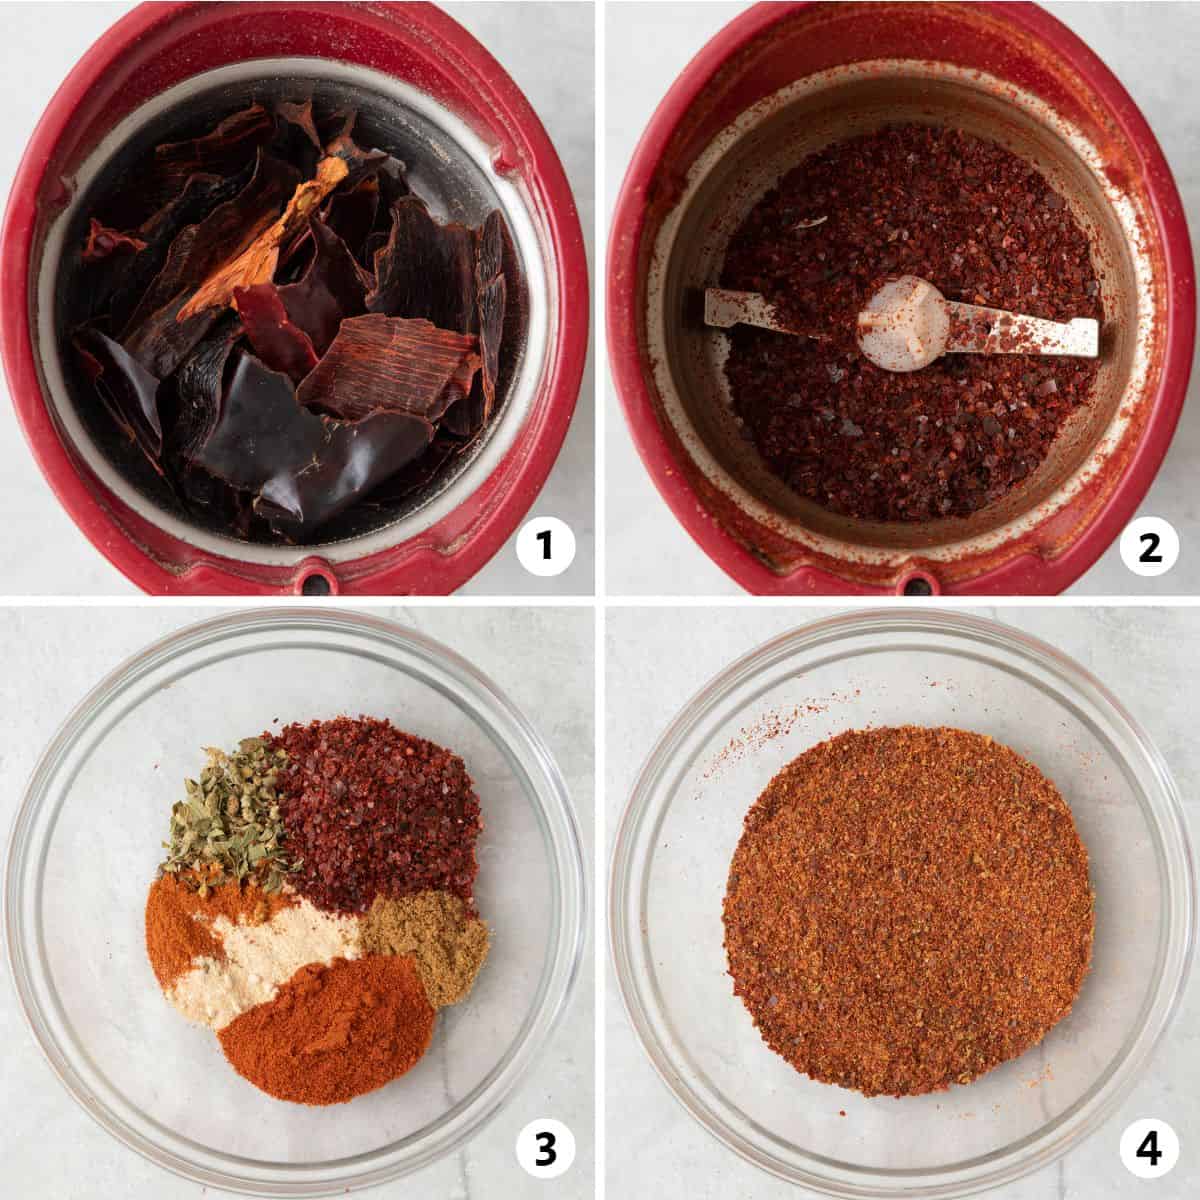 4 image collage making recipe: 1- dried chilis in a spice grinder, 2- after grinding, 3- spice blend added to a small bowl before combining, 4- after combining.